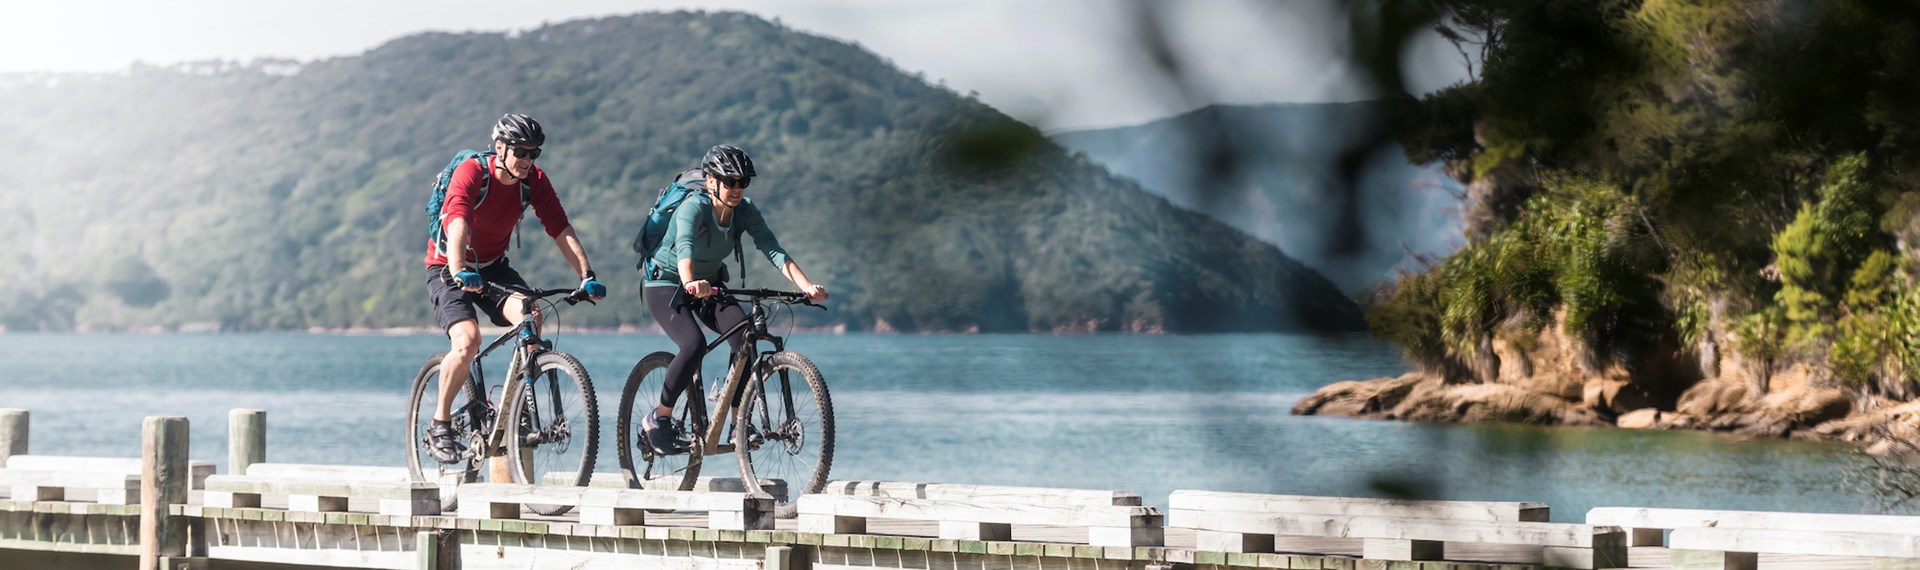 A male and female biking along the Ship Cove/Meretoto jetty at the start of the Queen Charlotte Track